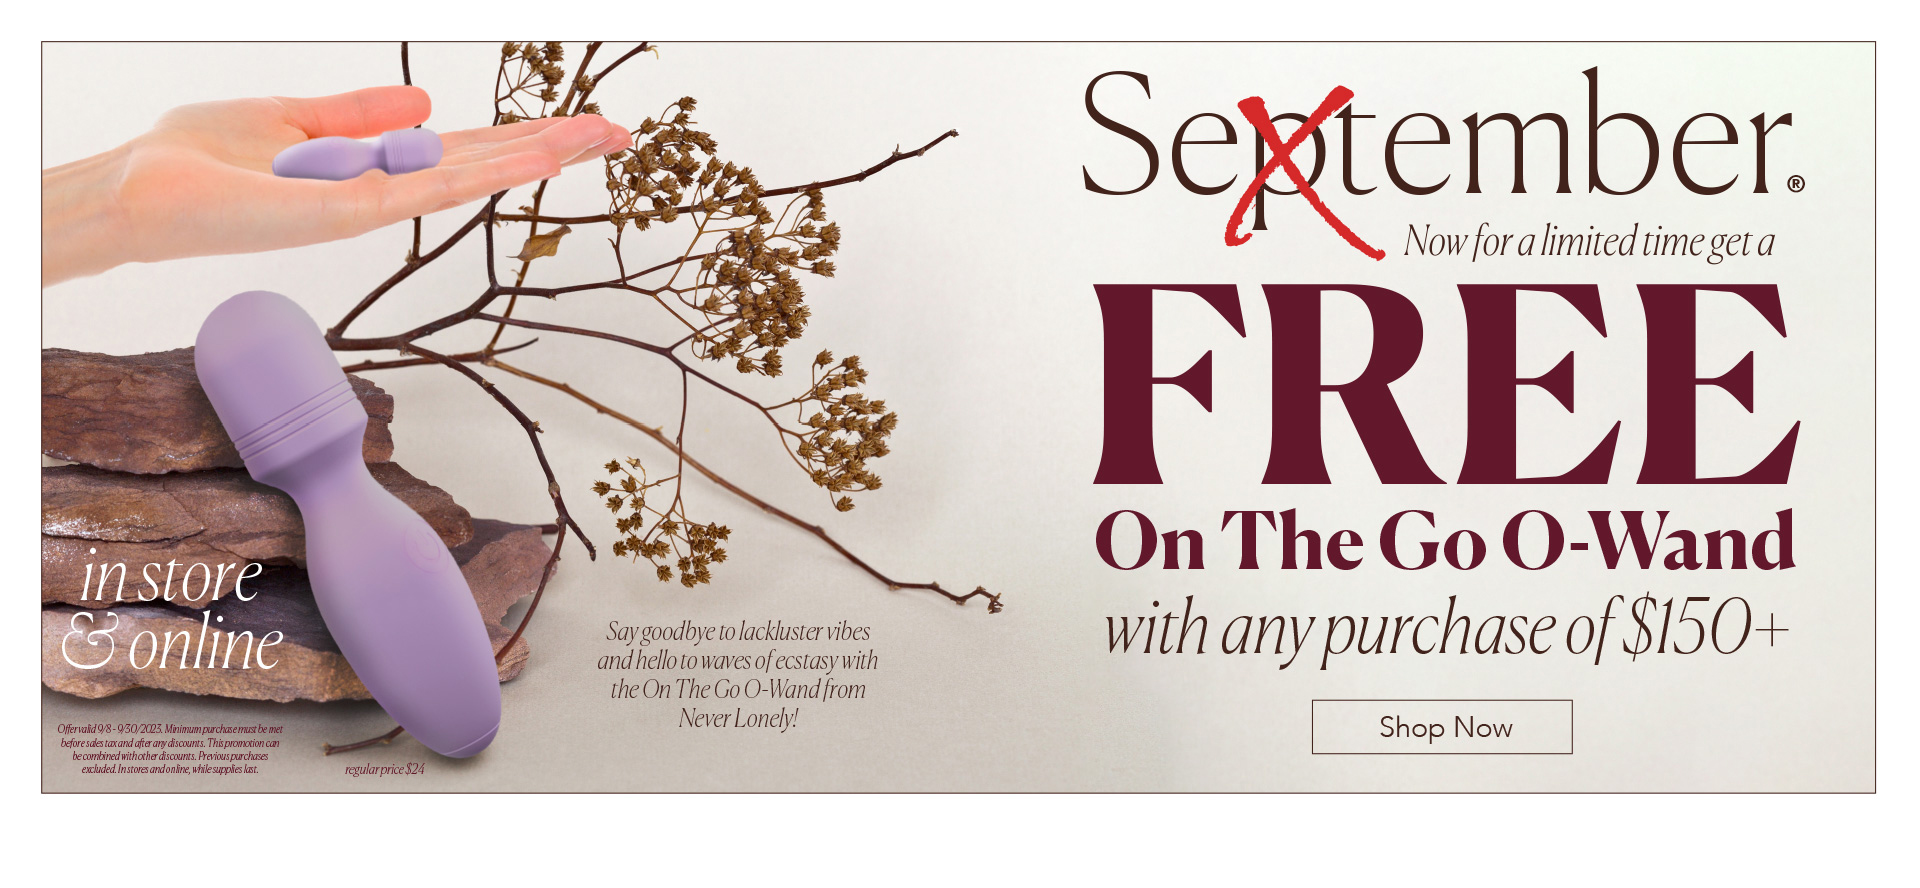 Sextember - Now for a limited time - FREE on the Go O-Wand with any purchase of $150+ - in store & online